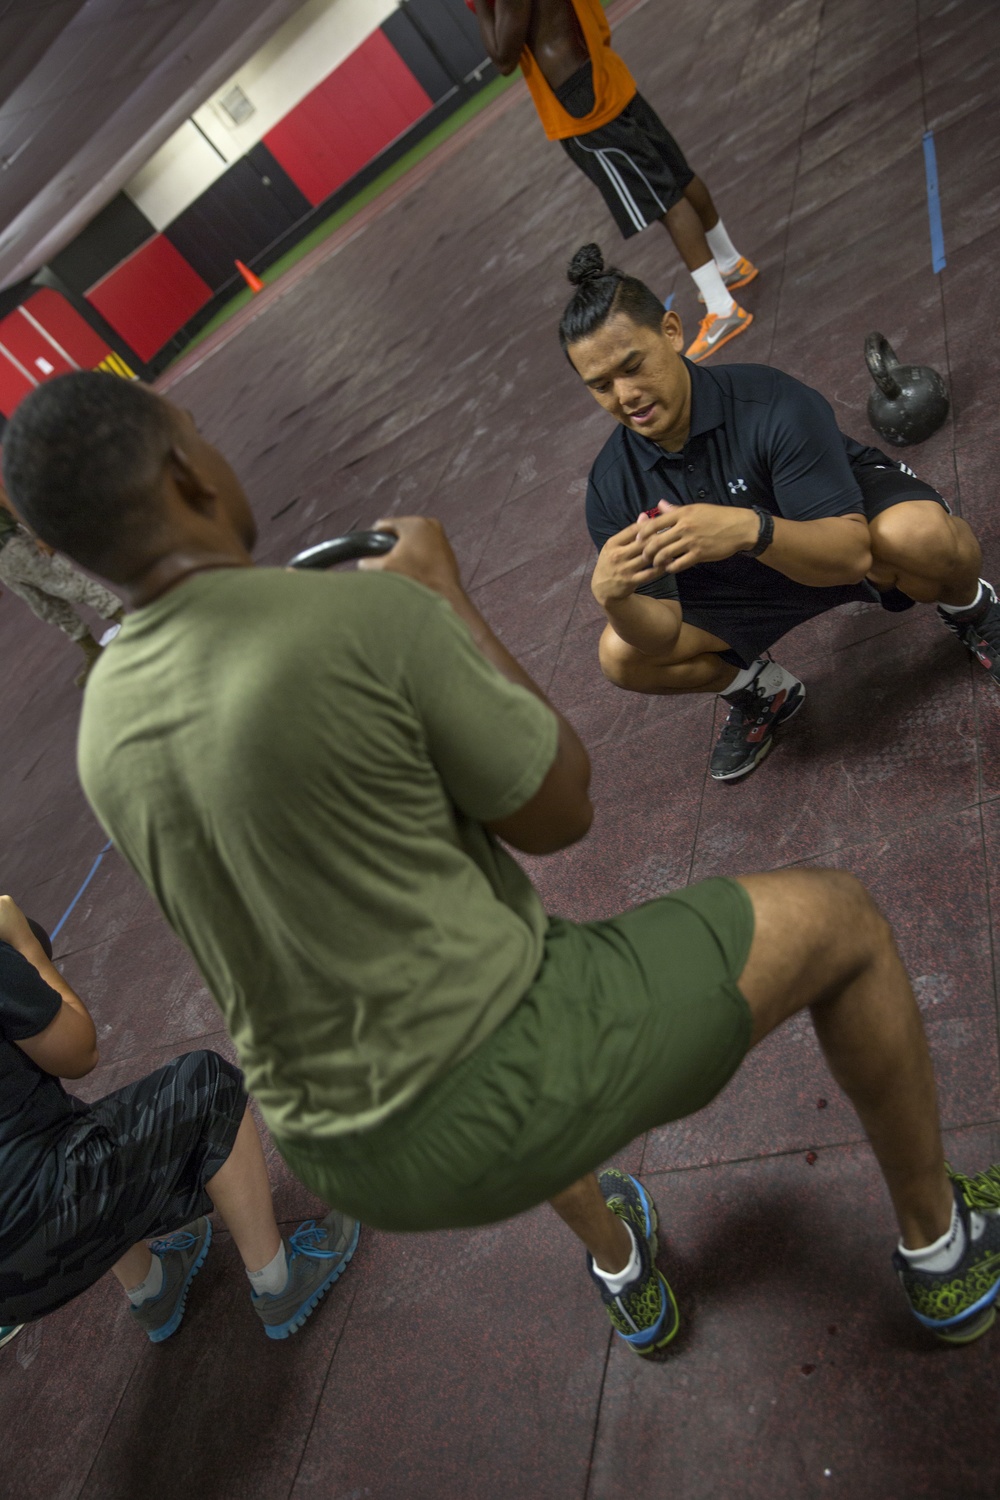 Fit to fight: personal trainer helps Service members get fit after injury